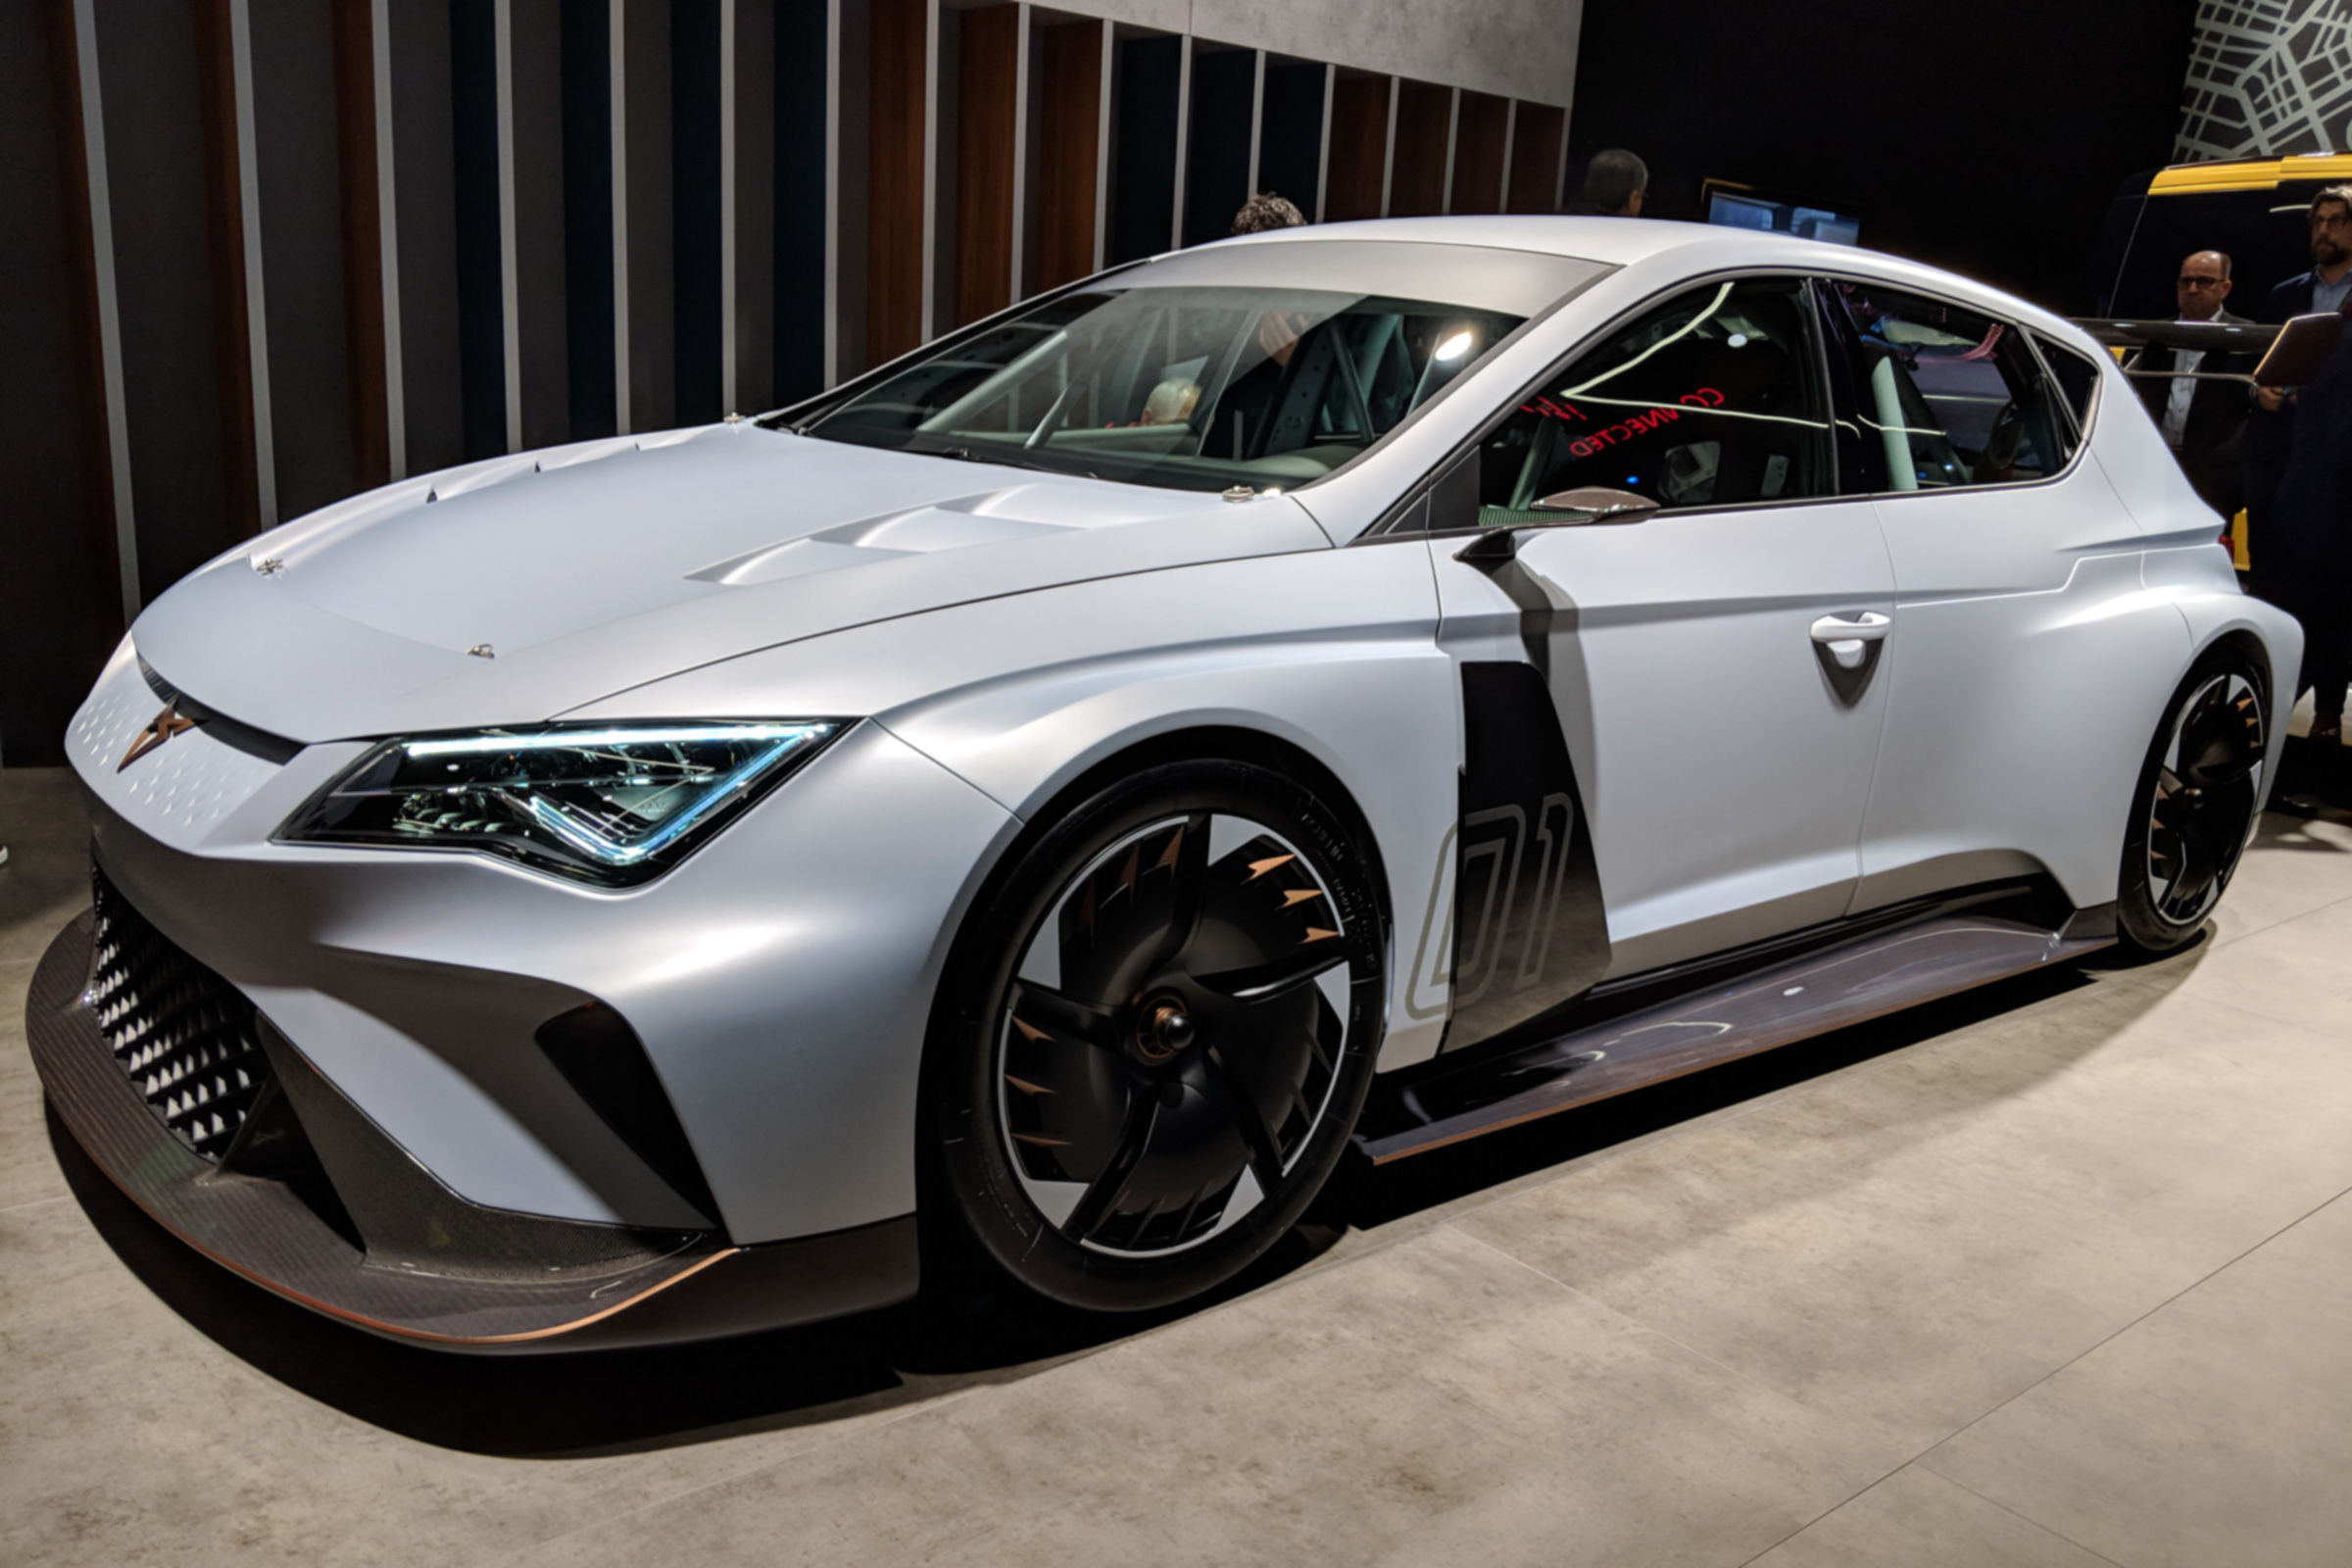 Cupra e-Racer concept: new electric touring car from SEAT 